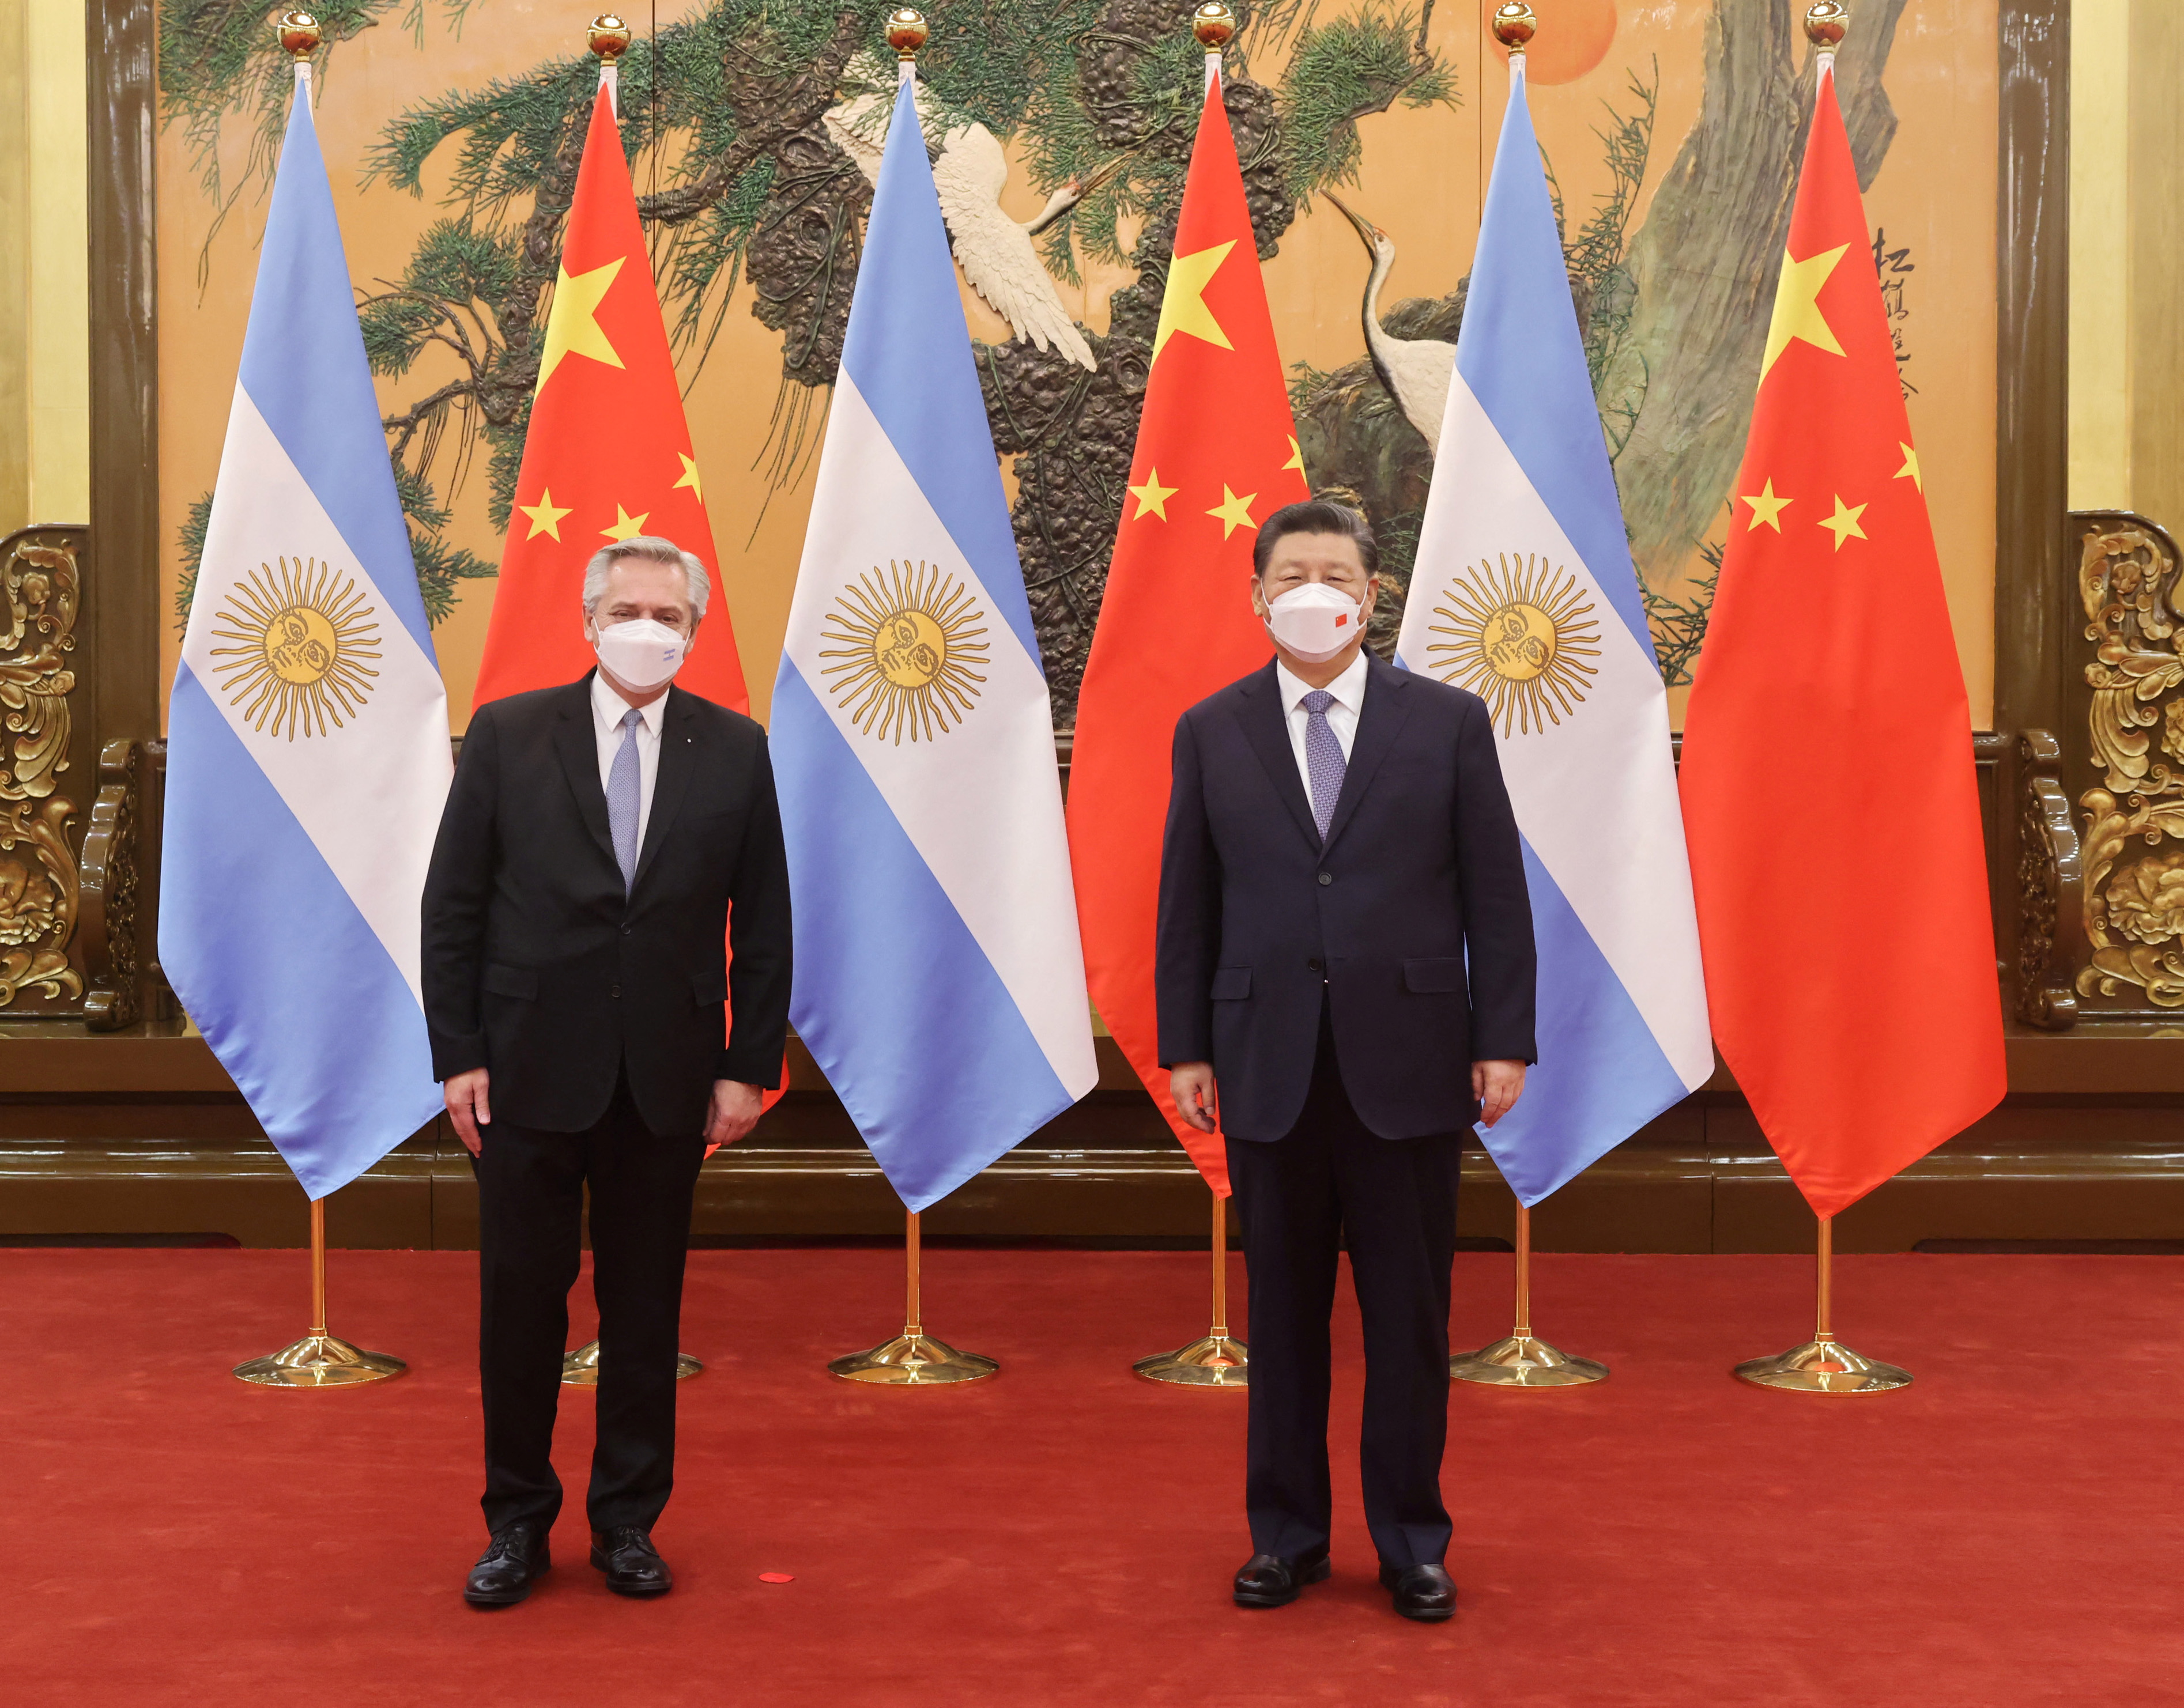 Alberto Fernandez and Xi Jinping, during the President's visit to China last February